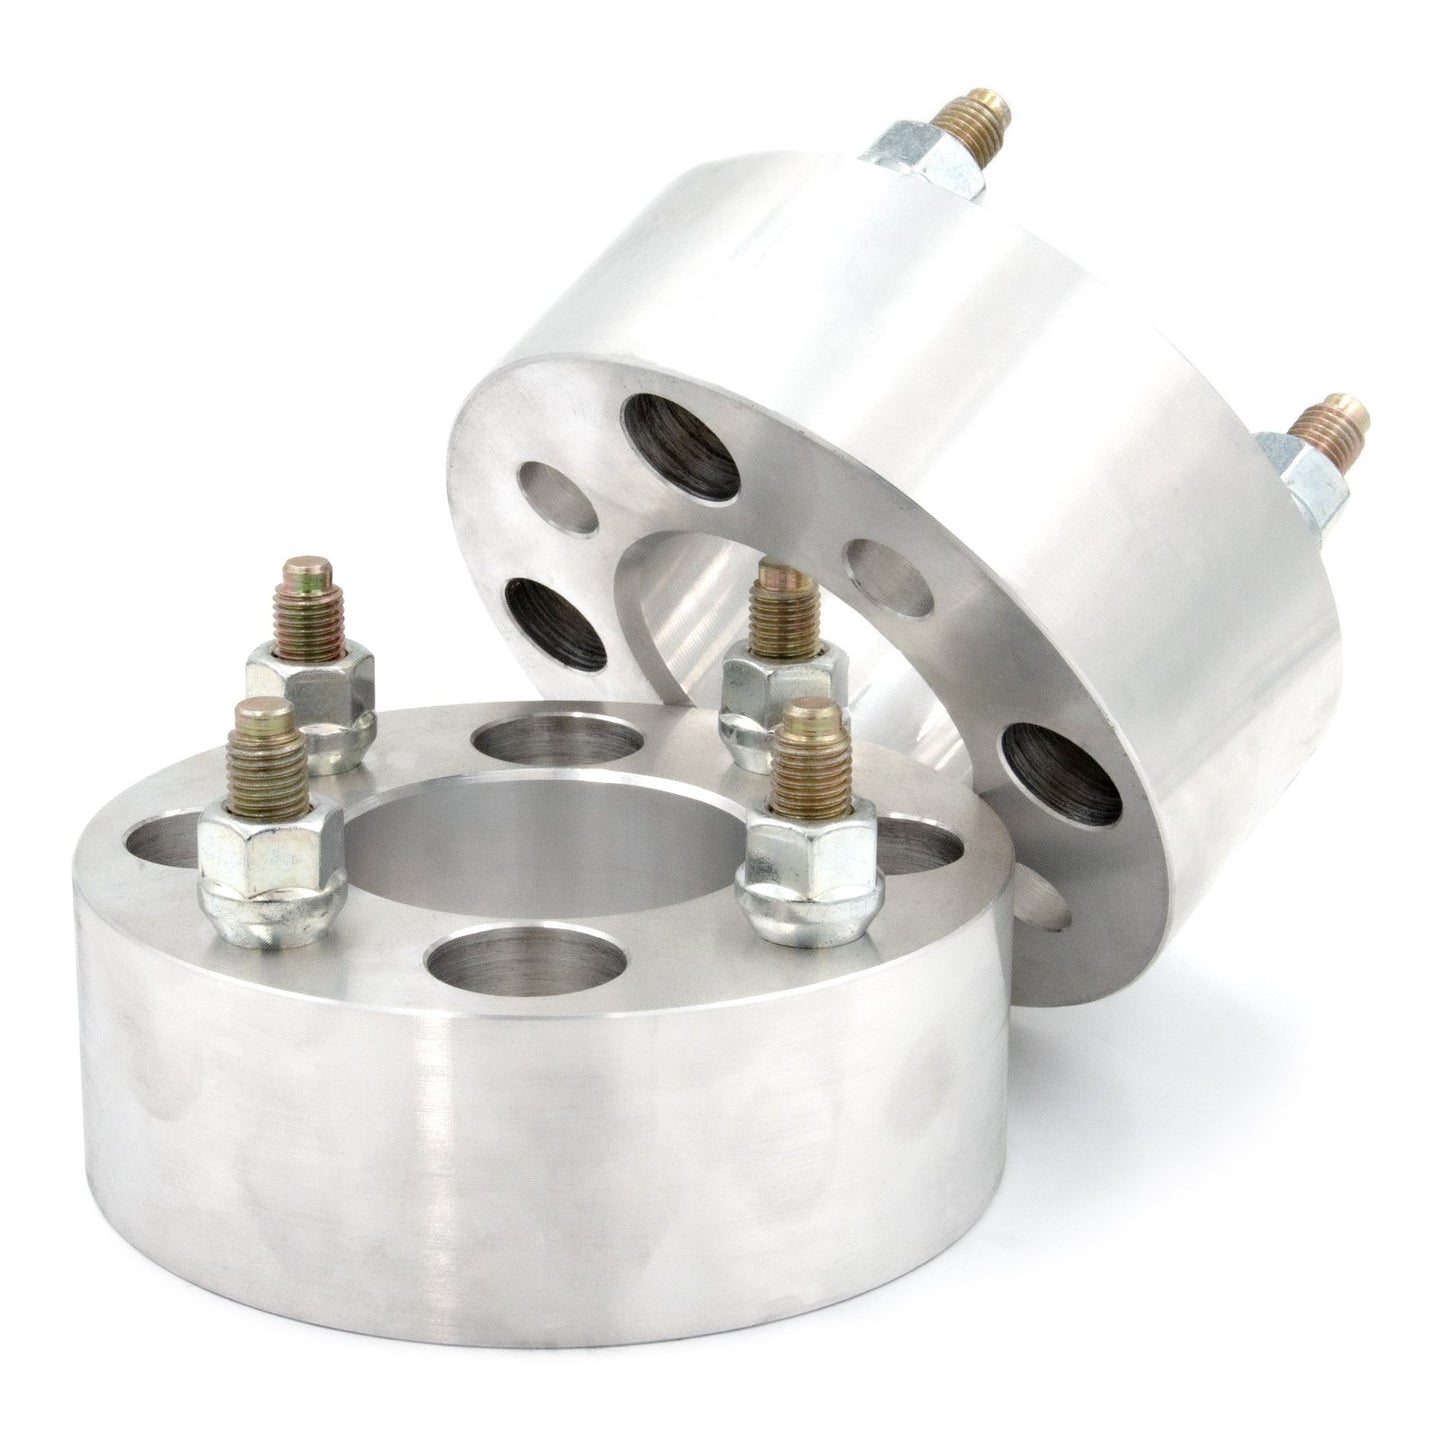 4x110 to 4x100 Wheel Spacer/Adapter - Thickness: 3/4"- 4"